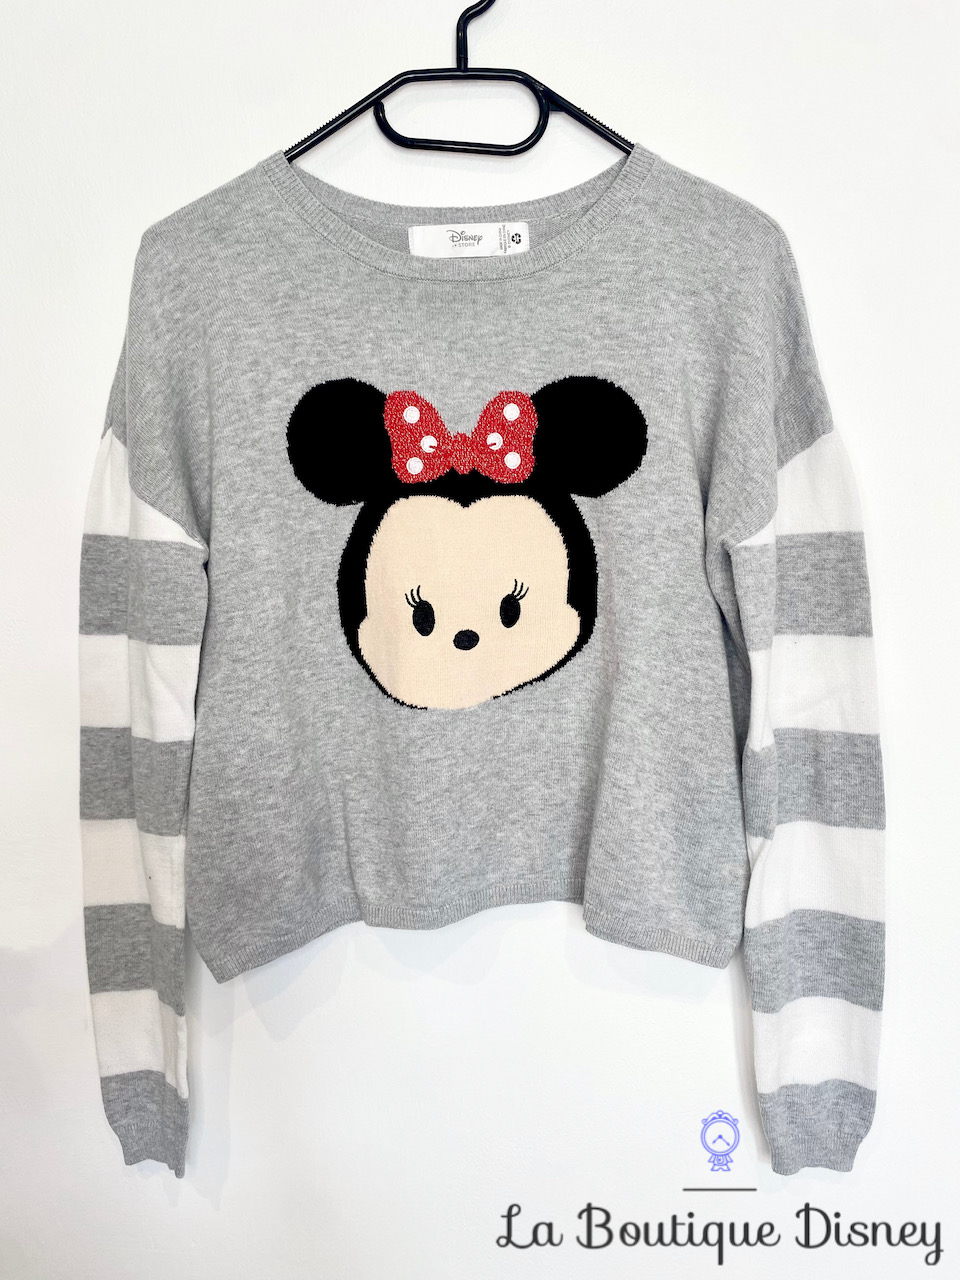 Pull cropped Minnie Mouse Tsum Tsum Disney Store taille S gris rayures